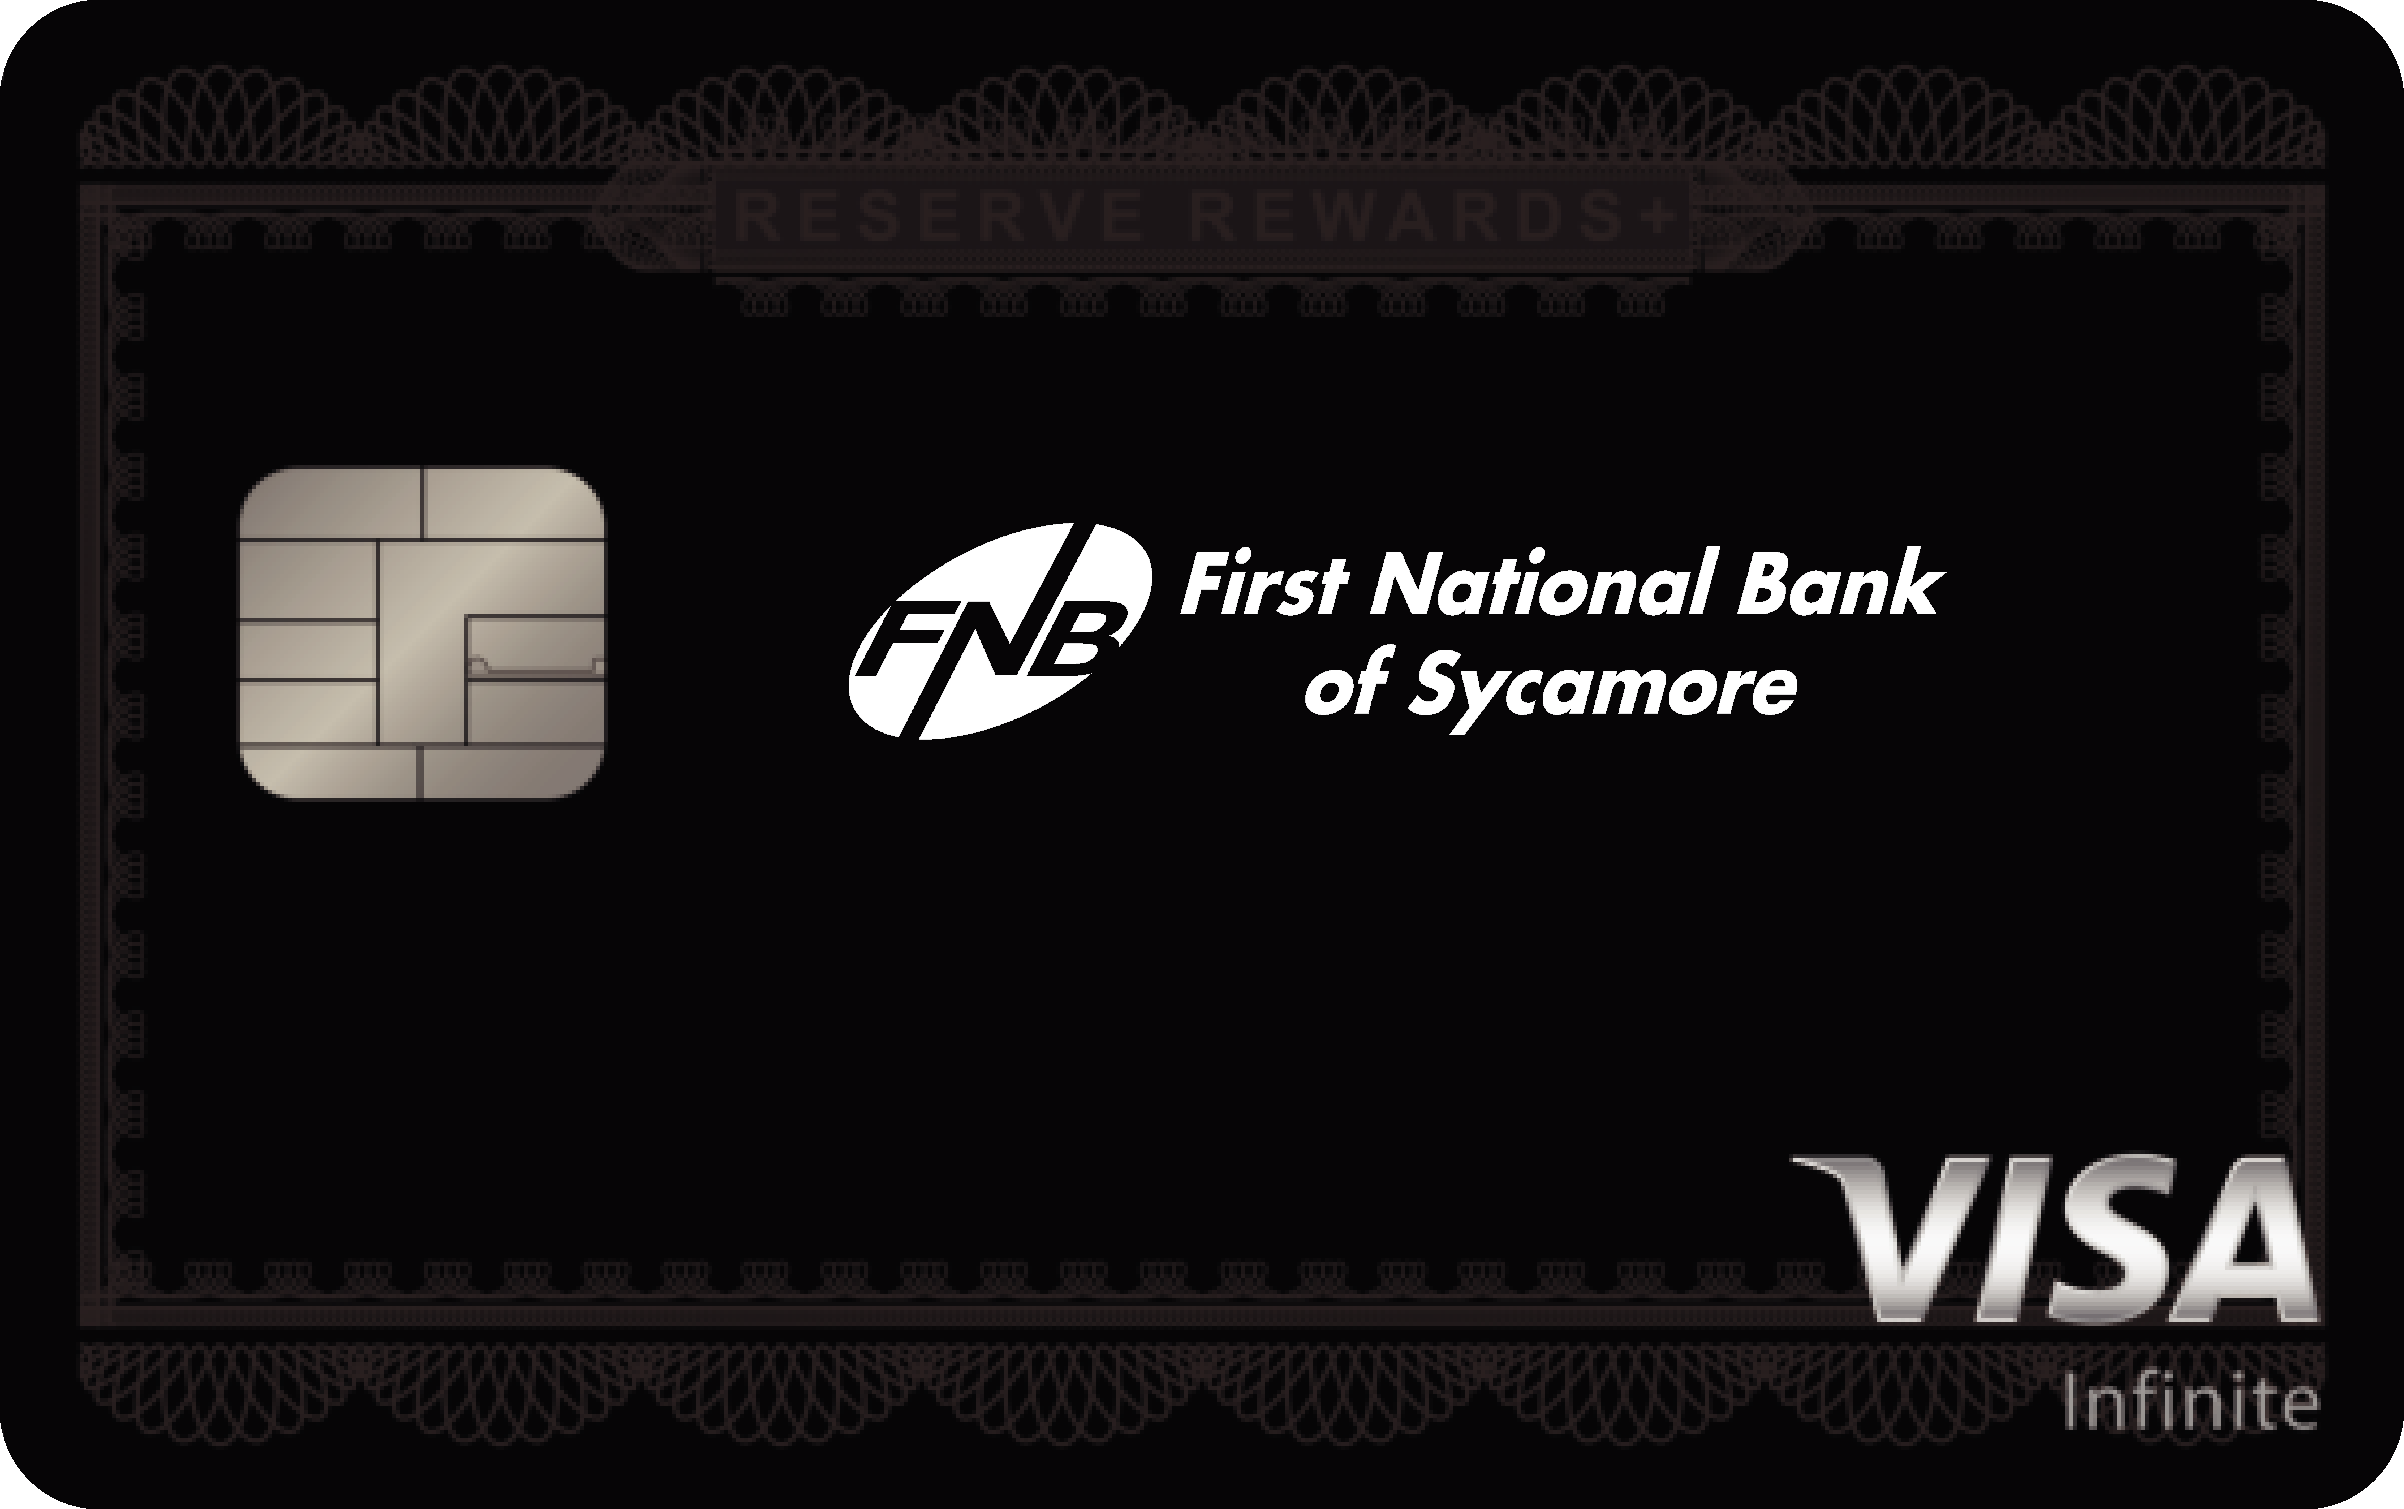 First National Bank of Sycamore